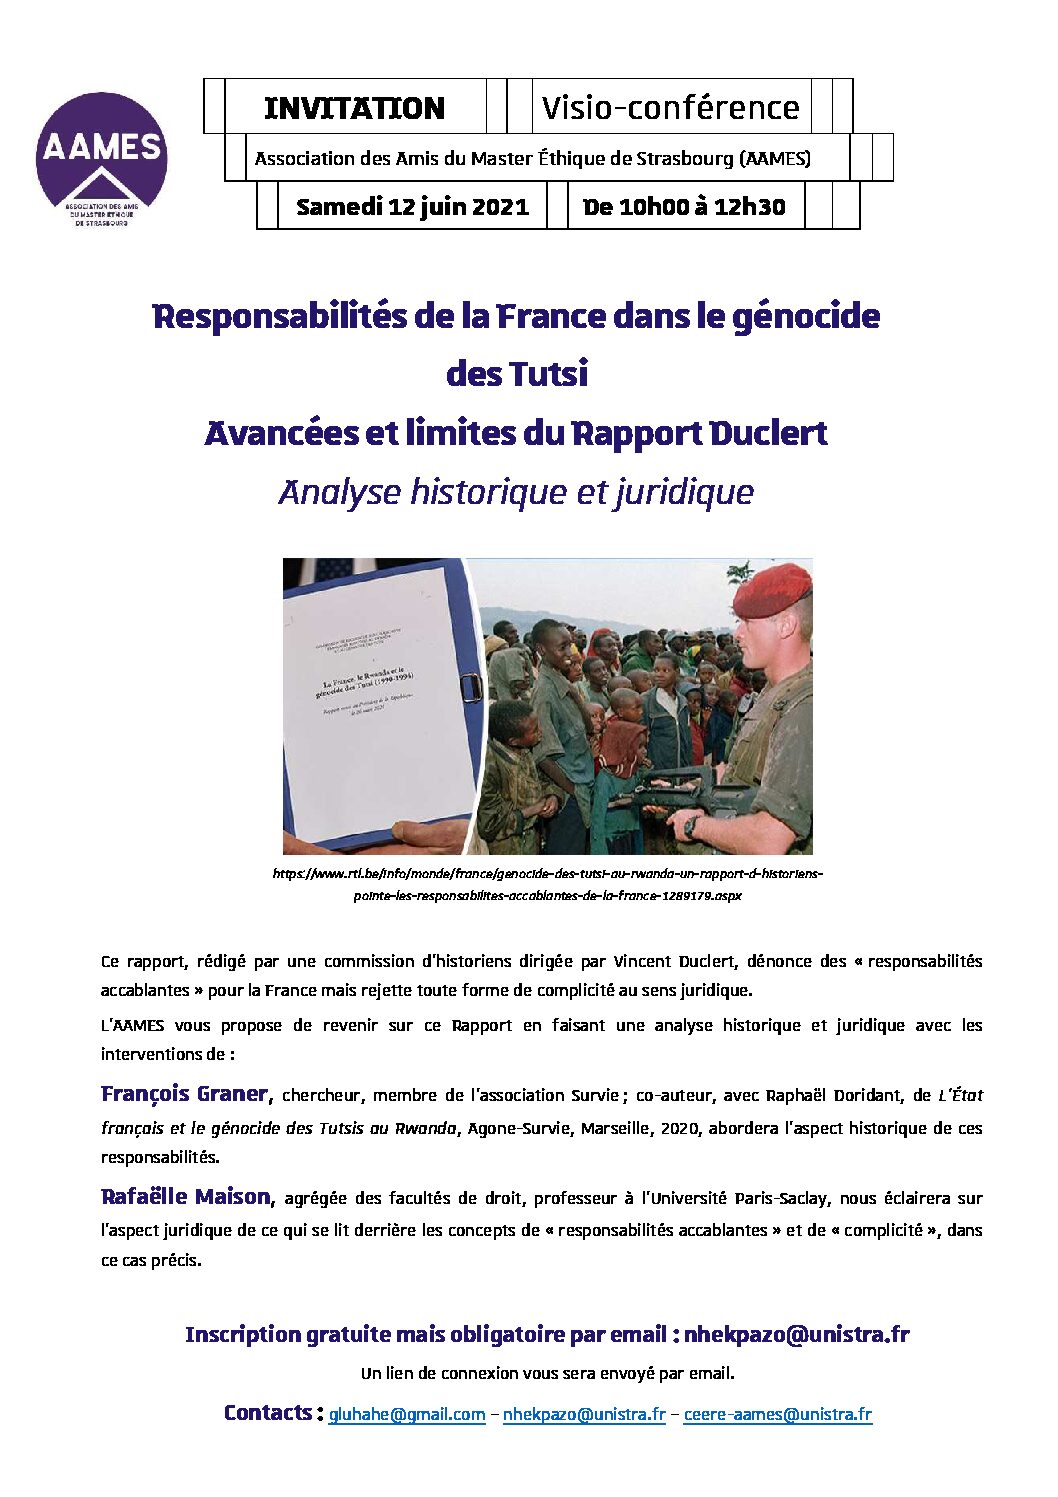 Invitation_JE_Rapport Duclert 12.06_AAMES-vf